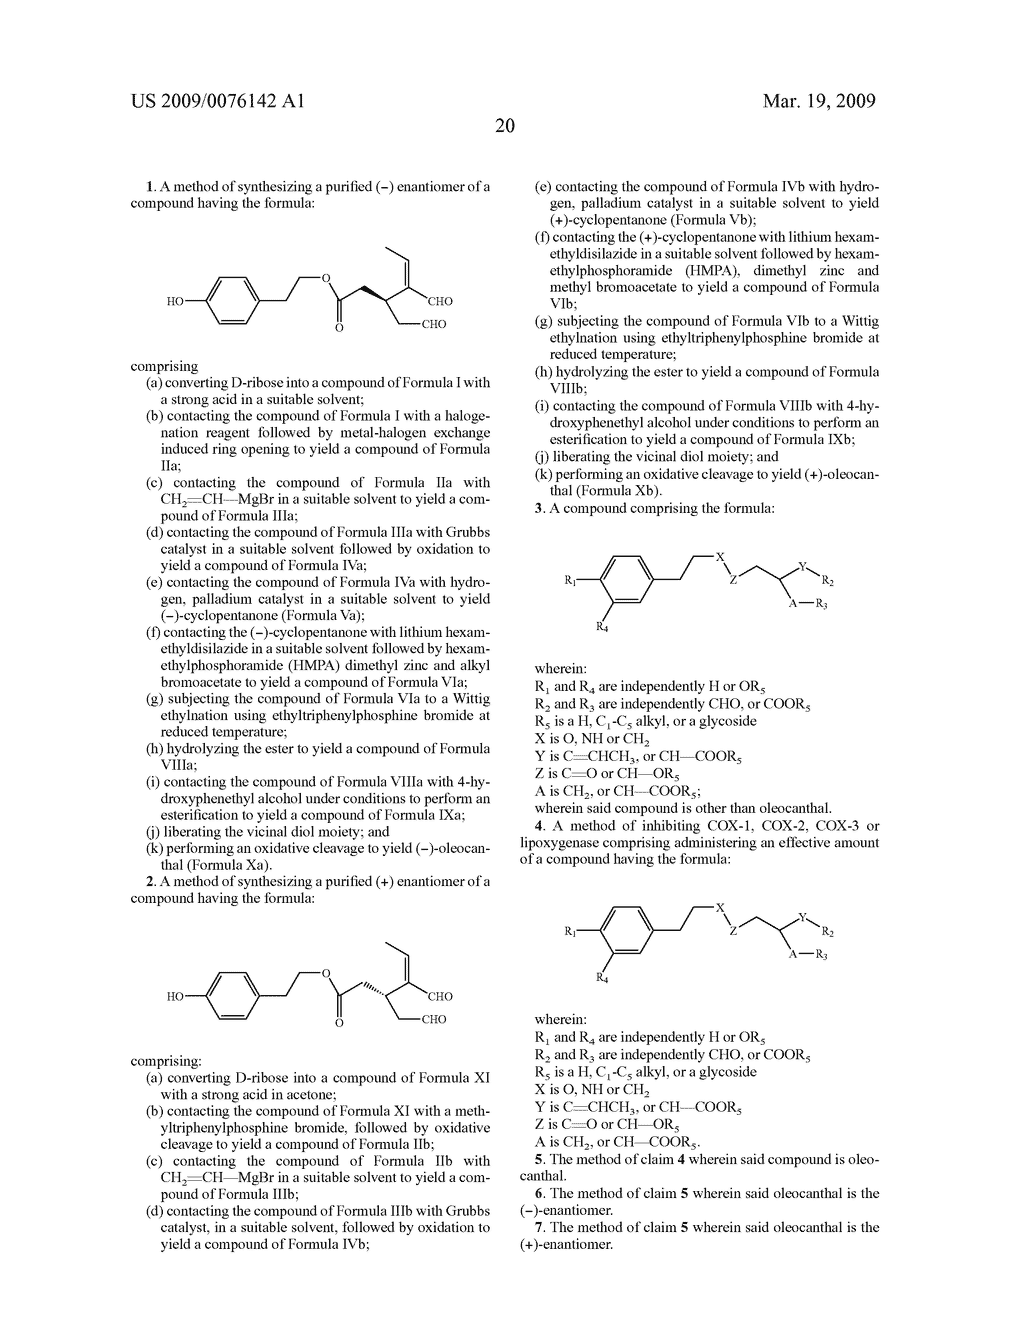 USE OF THE IRRITATING PRINCIPAL OLEOCANTHAL IN OLIVE OIL, AS WELL AS STRUCTURALLY AND FUNCTIONALLY SIMILAR COMPOUNDS - diagram, schematic, and image 26